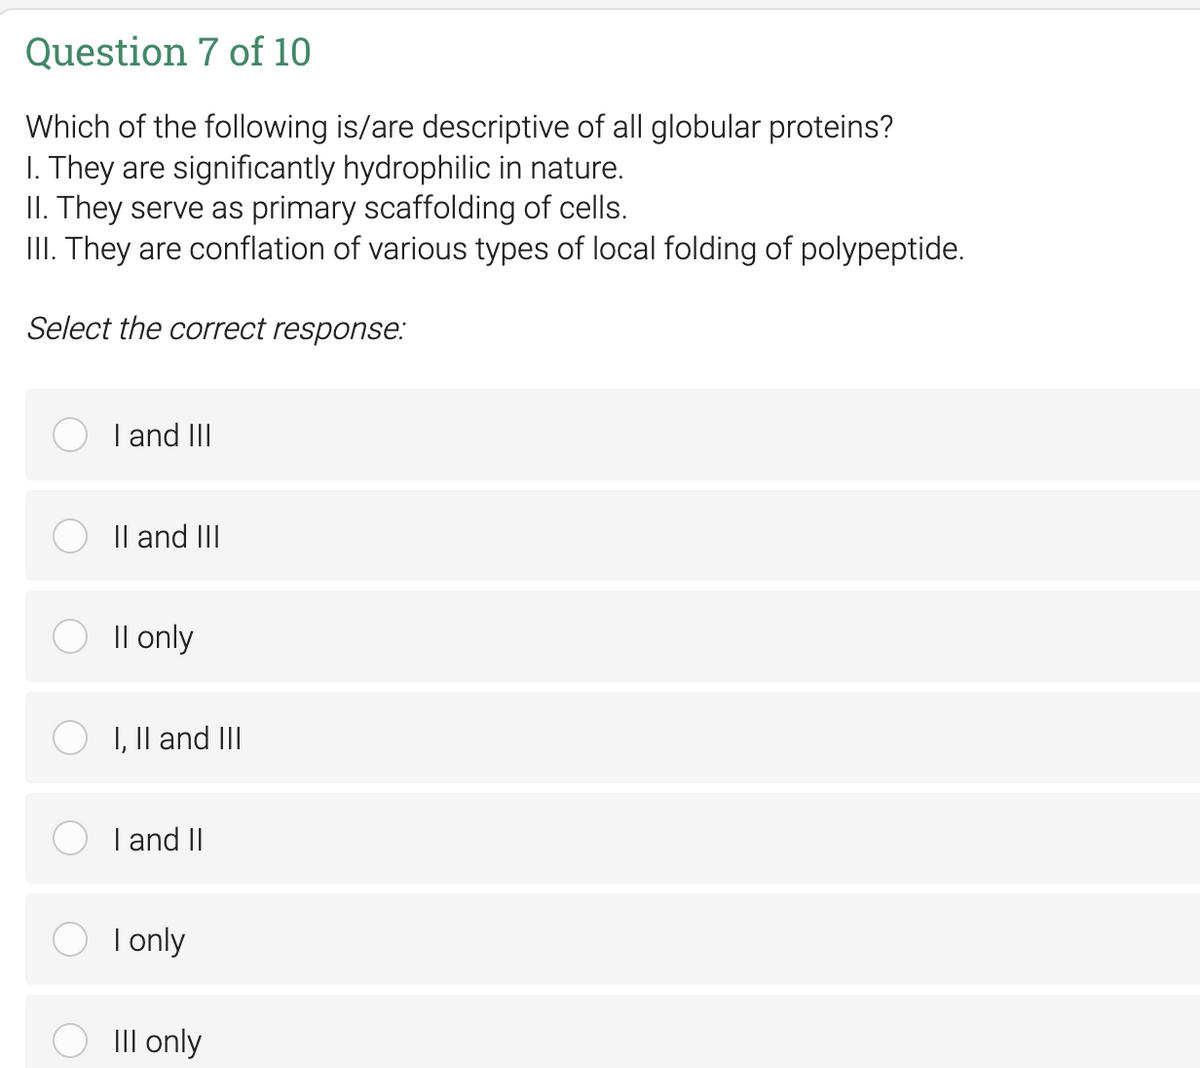 Question 7 of 10
Which of the following is/are descriptive of all globular proteins?
I. They are significantly hydrophilic in nature.
II. They serve as primary scaffolding of cells.
III. They are conflation of various types of local folding of polypeptide.
Select the correct response:
I and III
II and III
II only
I, II and III
I and II
O I only
III only